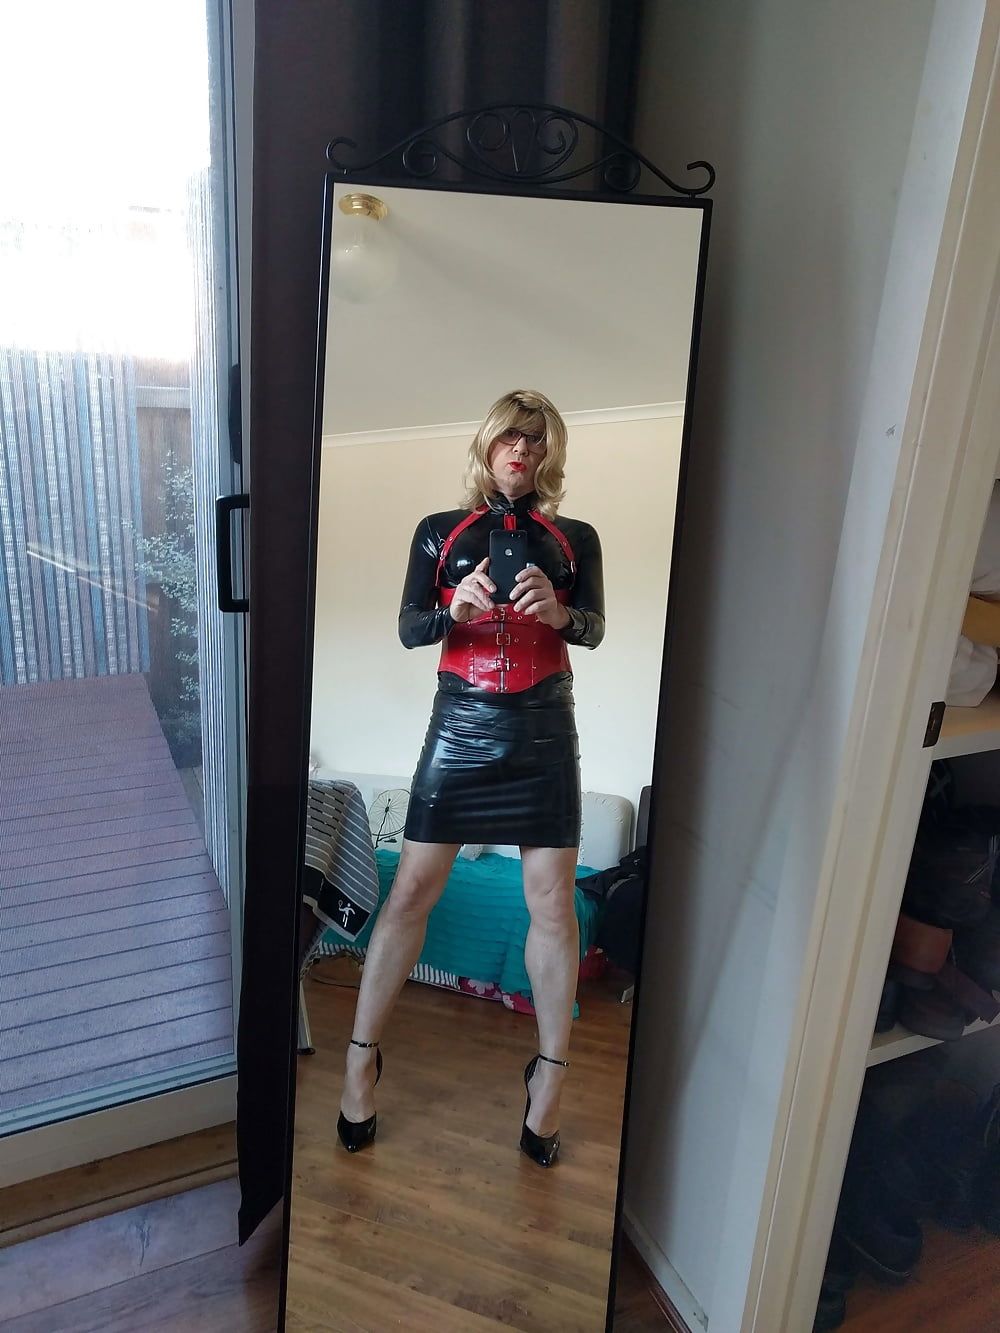 New latex skirt on a sunny Melbourne day #2